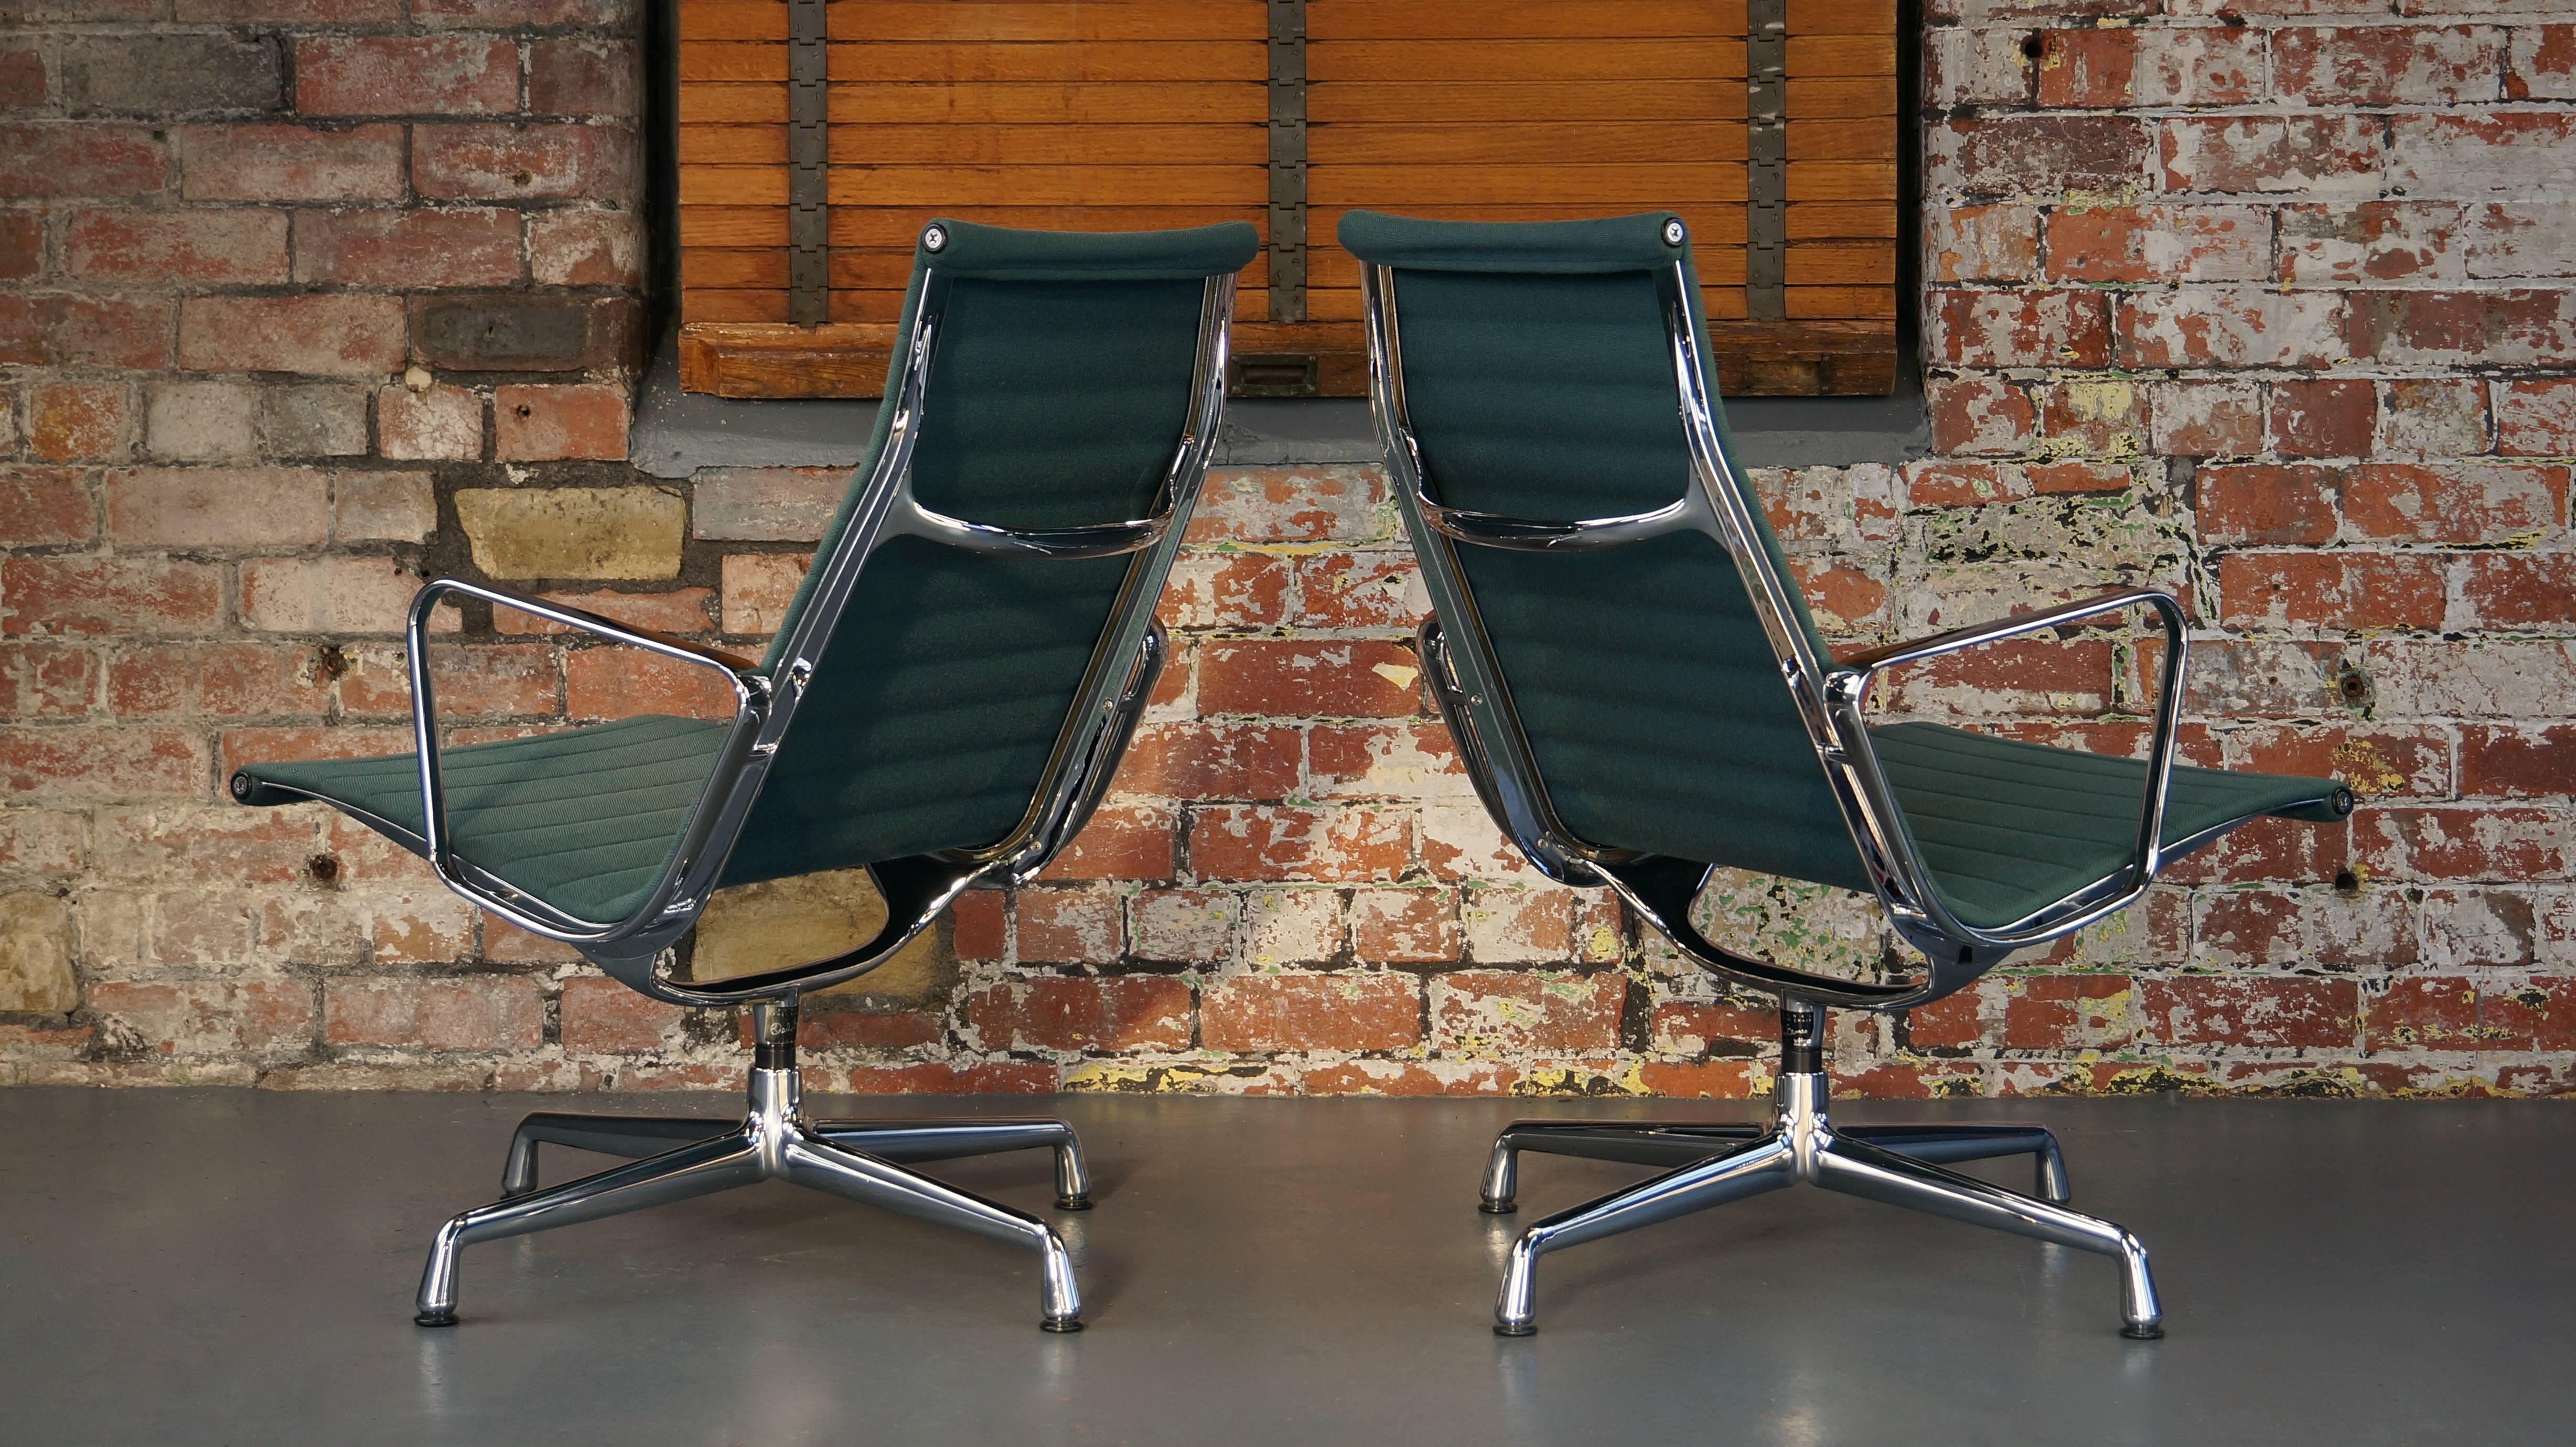 Mid-Century Modern Charles Eames EA 116 Hopsack Lounge Chairs Teal Green Blue Vintage Midcentury